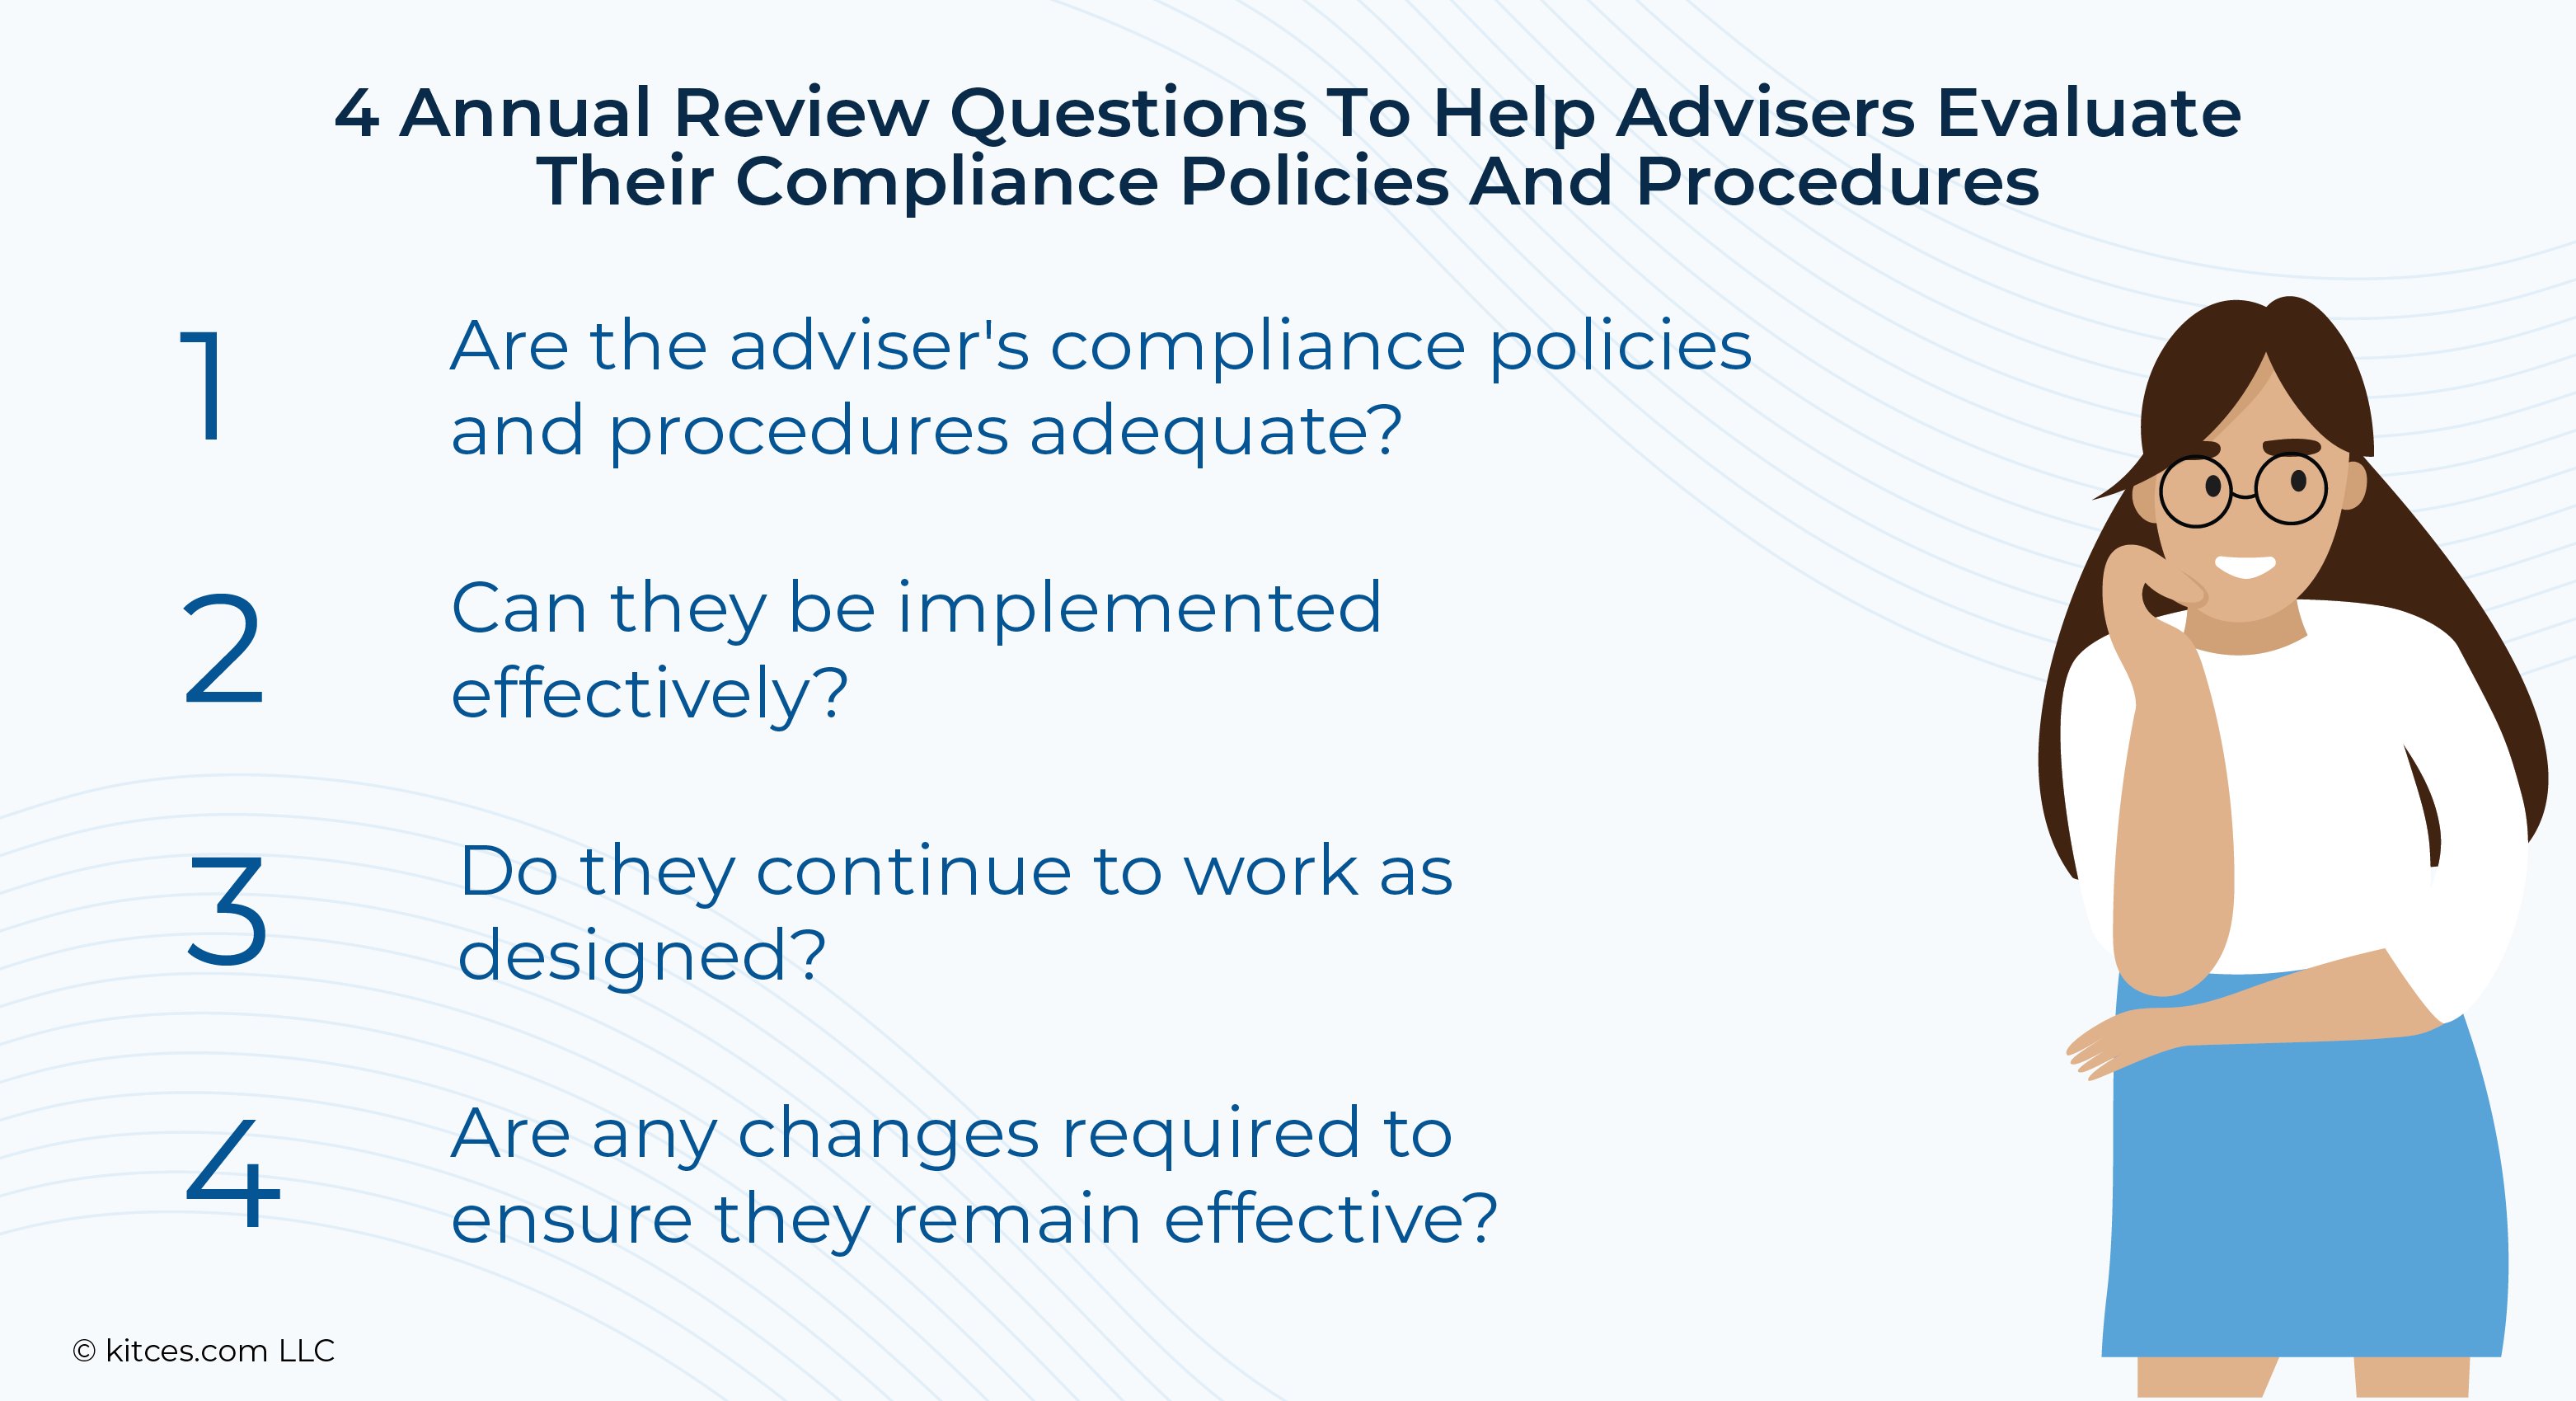 Annual Review Questions To Help Advisers Evaluate Their Compliance Policies And Procedures